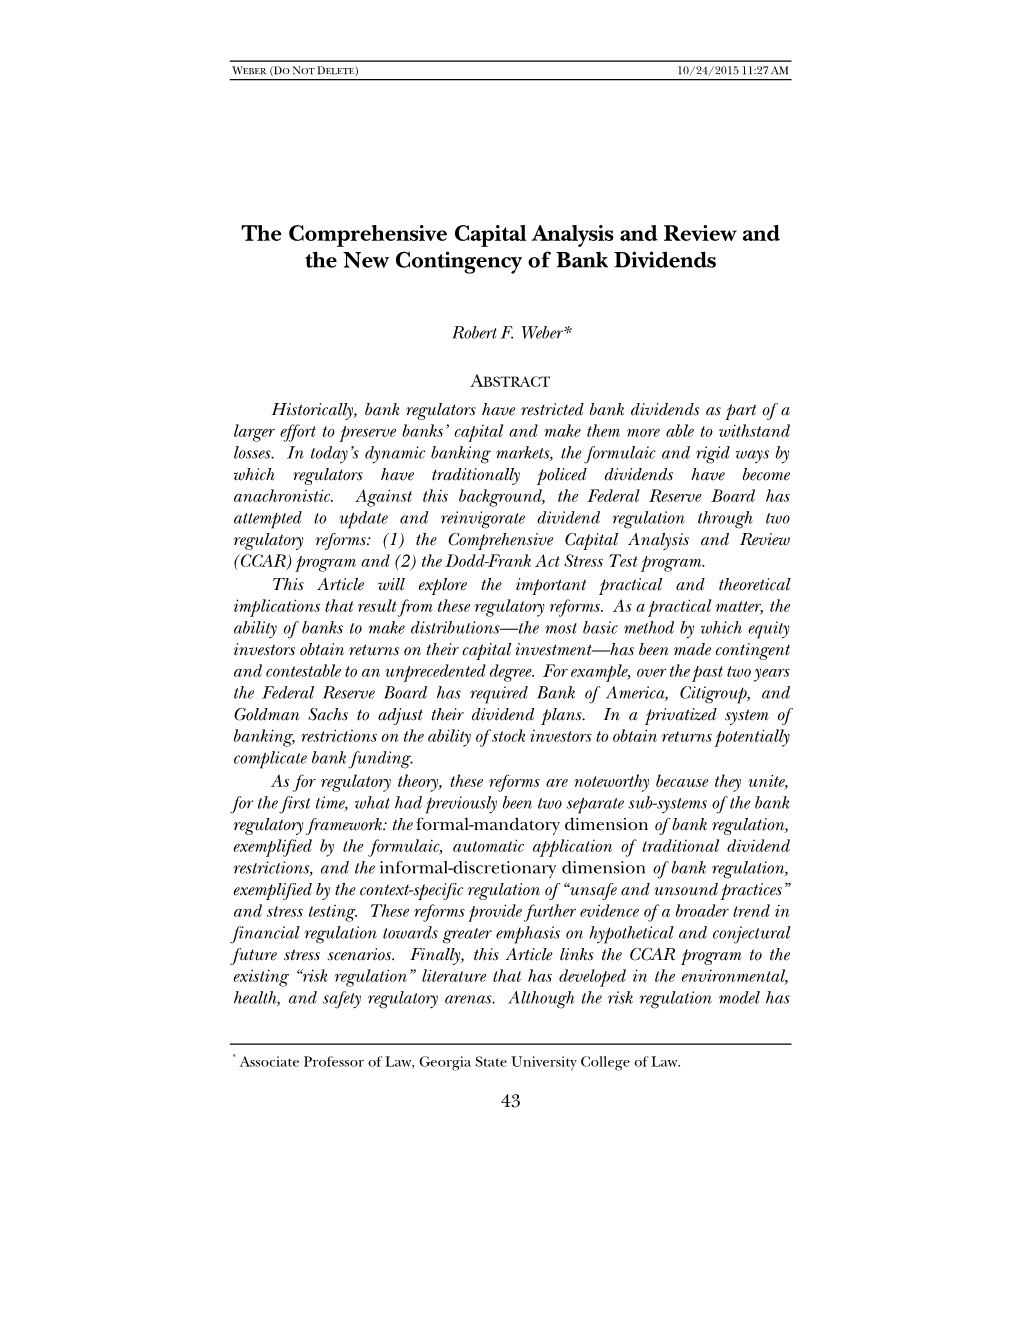 The Comprehensive Capital Analysis and Review and the New Contingency of Bank Dividends